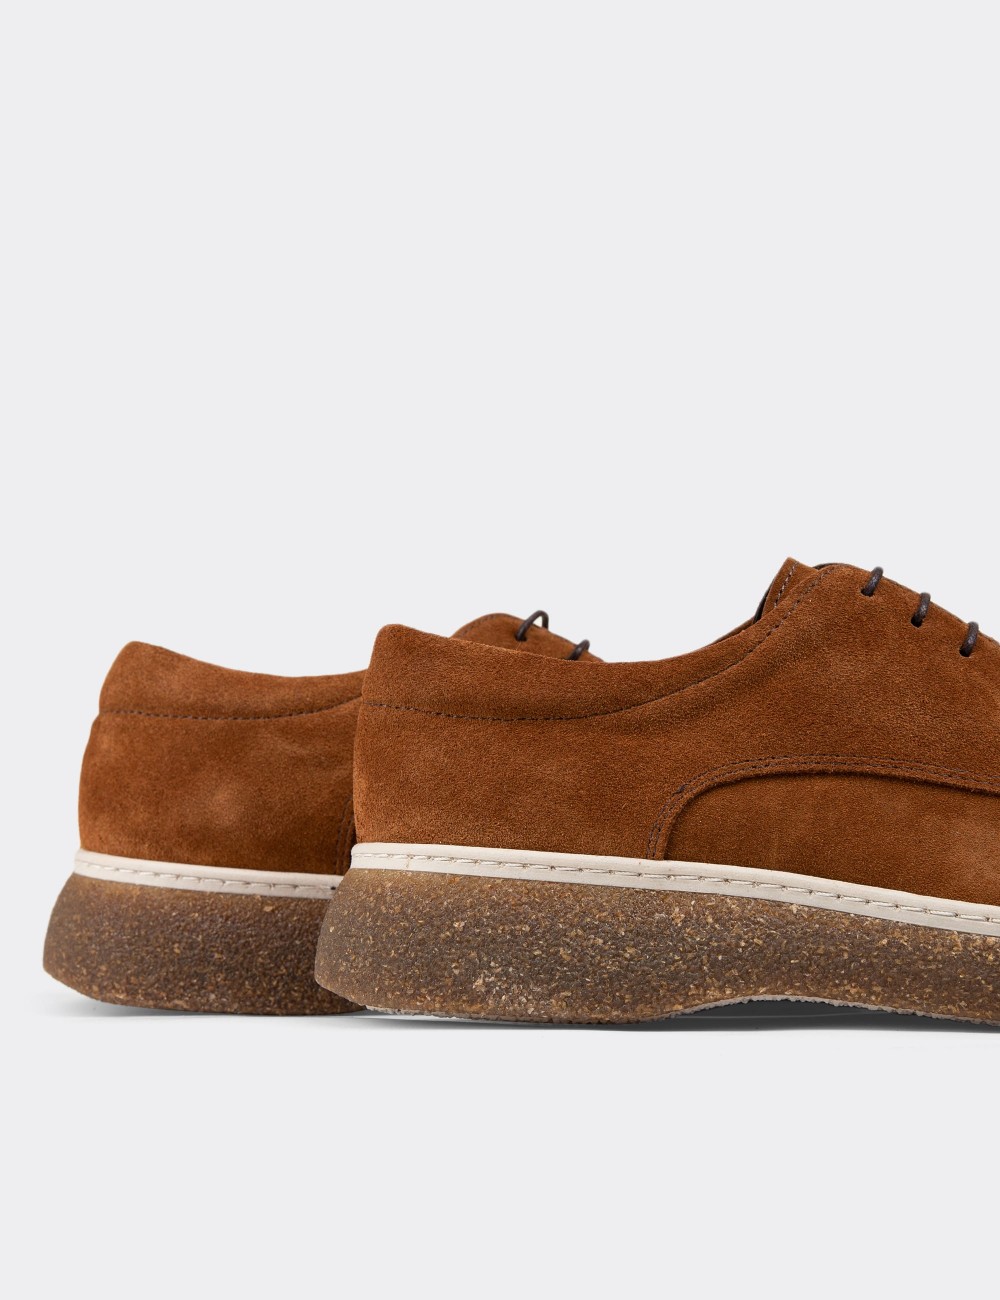 Tan Suede Leather Lace-up Shoes - 01934MTBAC01